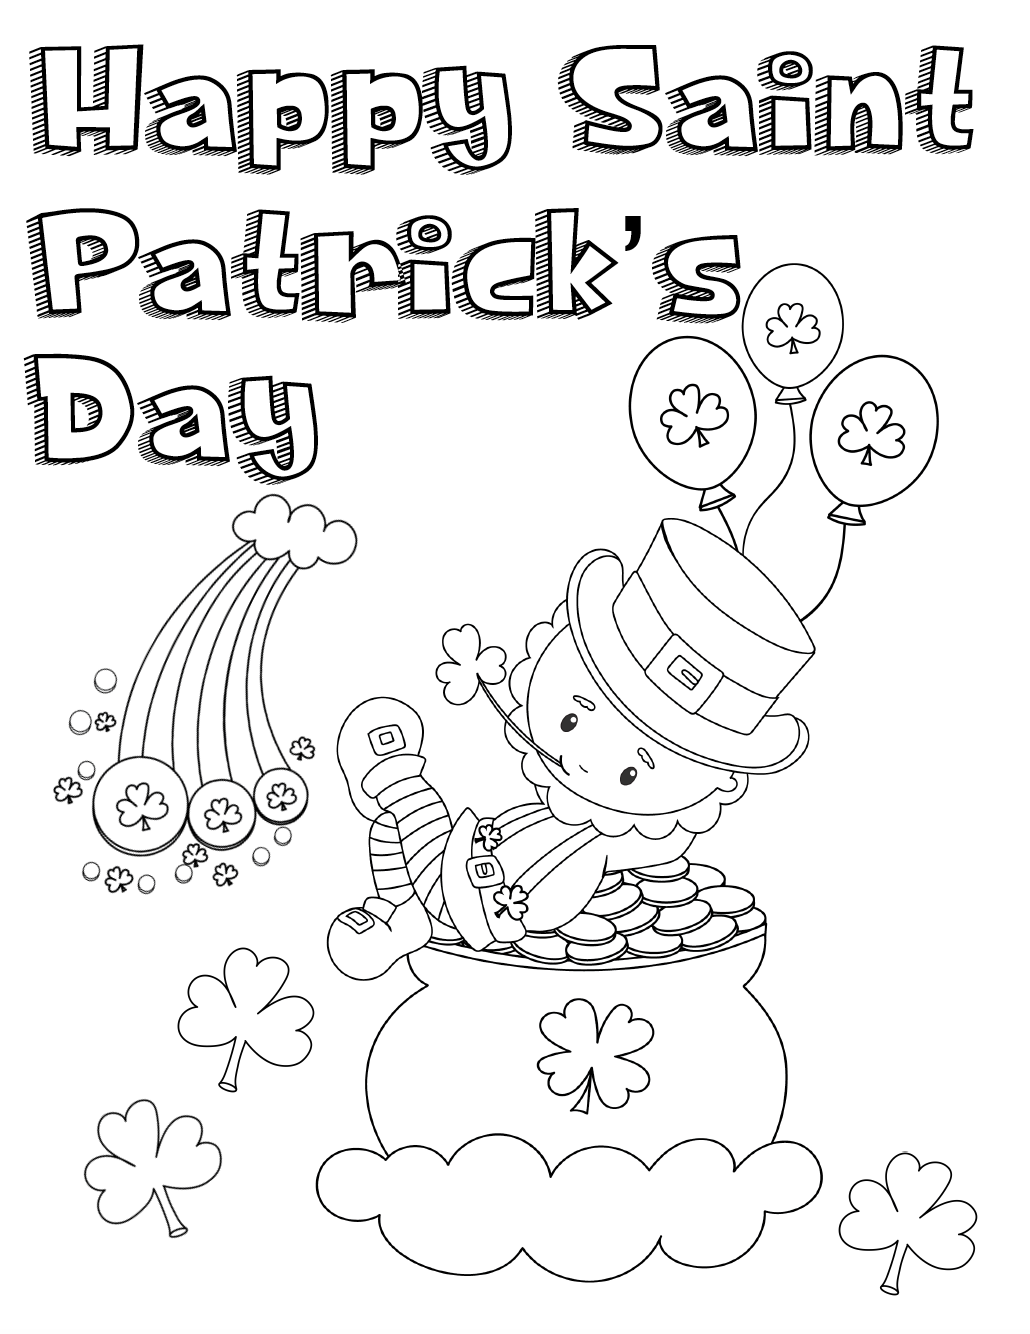 Free Printable St Patrick s Day Coloring Pages: 4 Designs